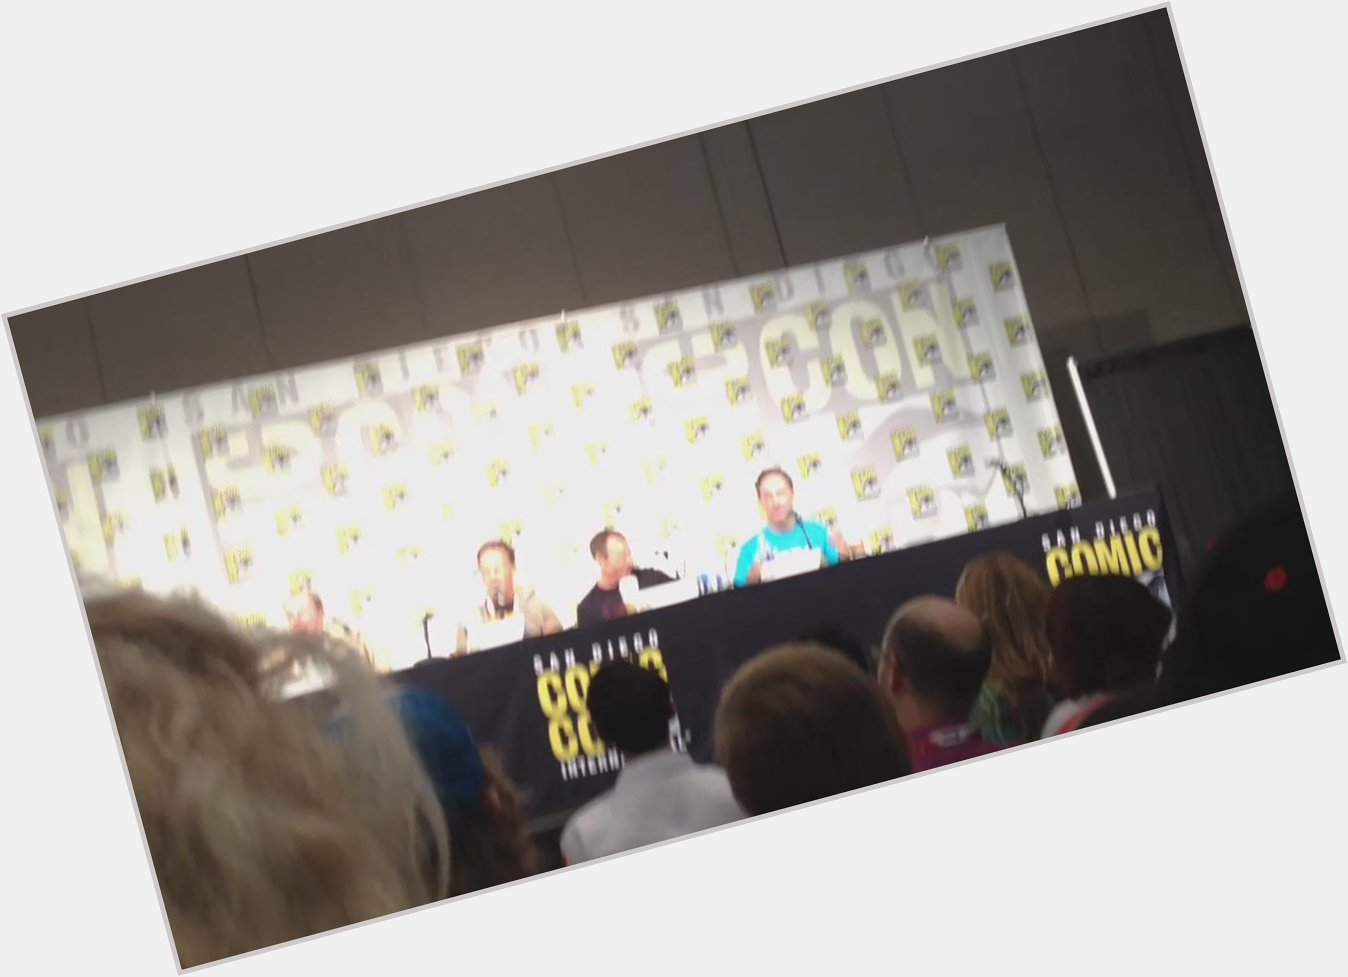 Everyone at the Spongebob panel wished Tom Kenny a happy birthday! 